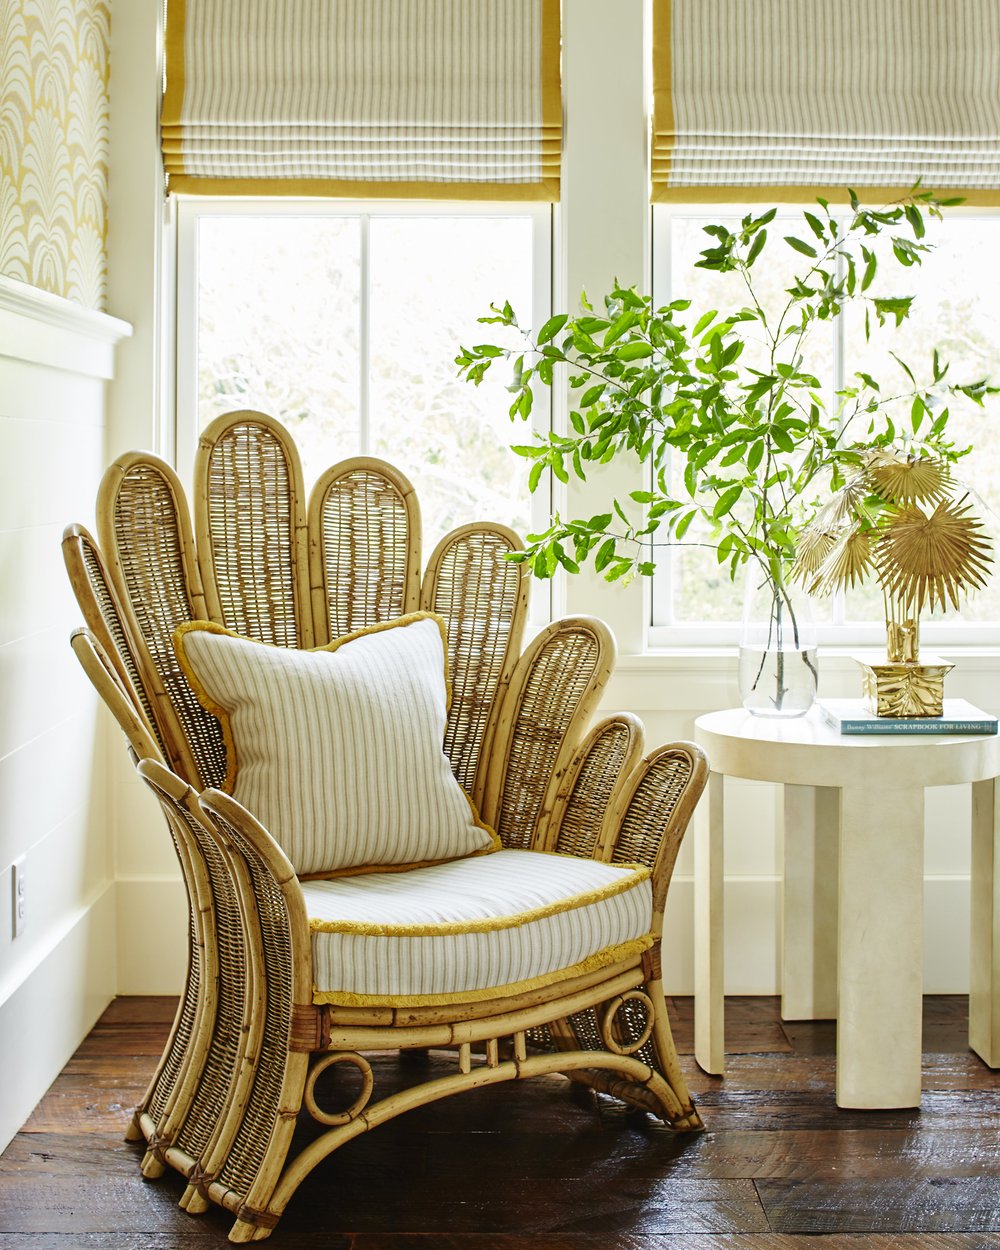 A bright, natural-light-filled reading corner with a flower rattan chair, roman shades upon the windows, and a round side table adorned with plants and other decoration.